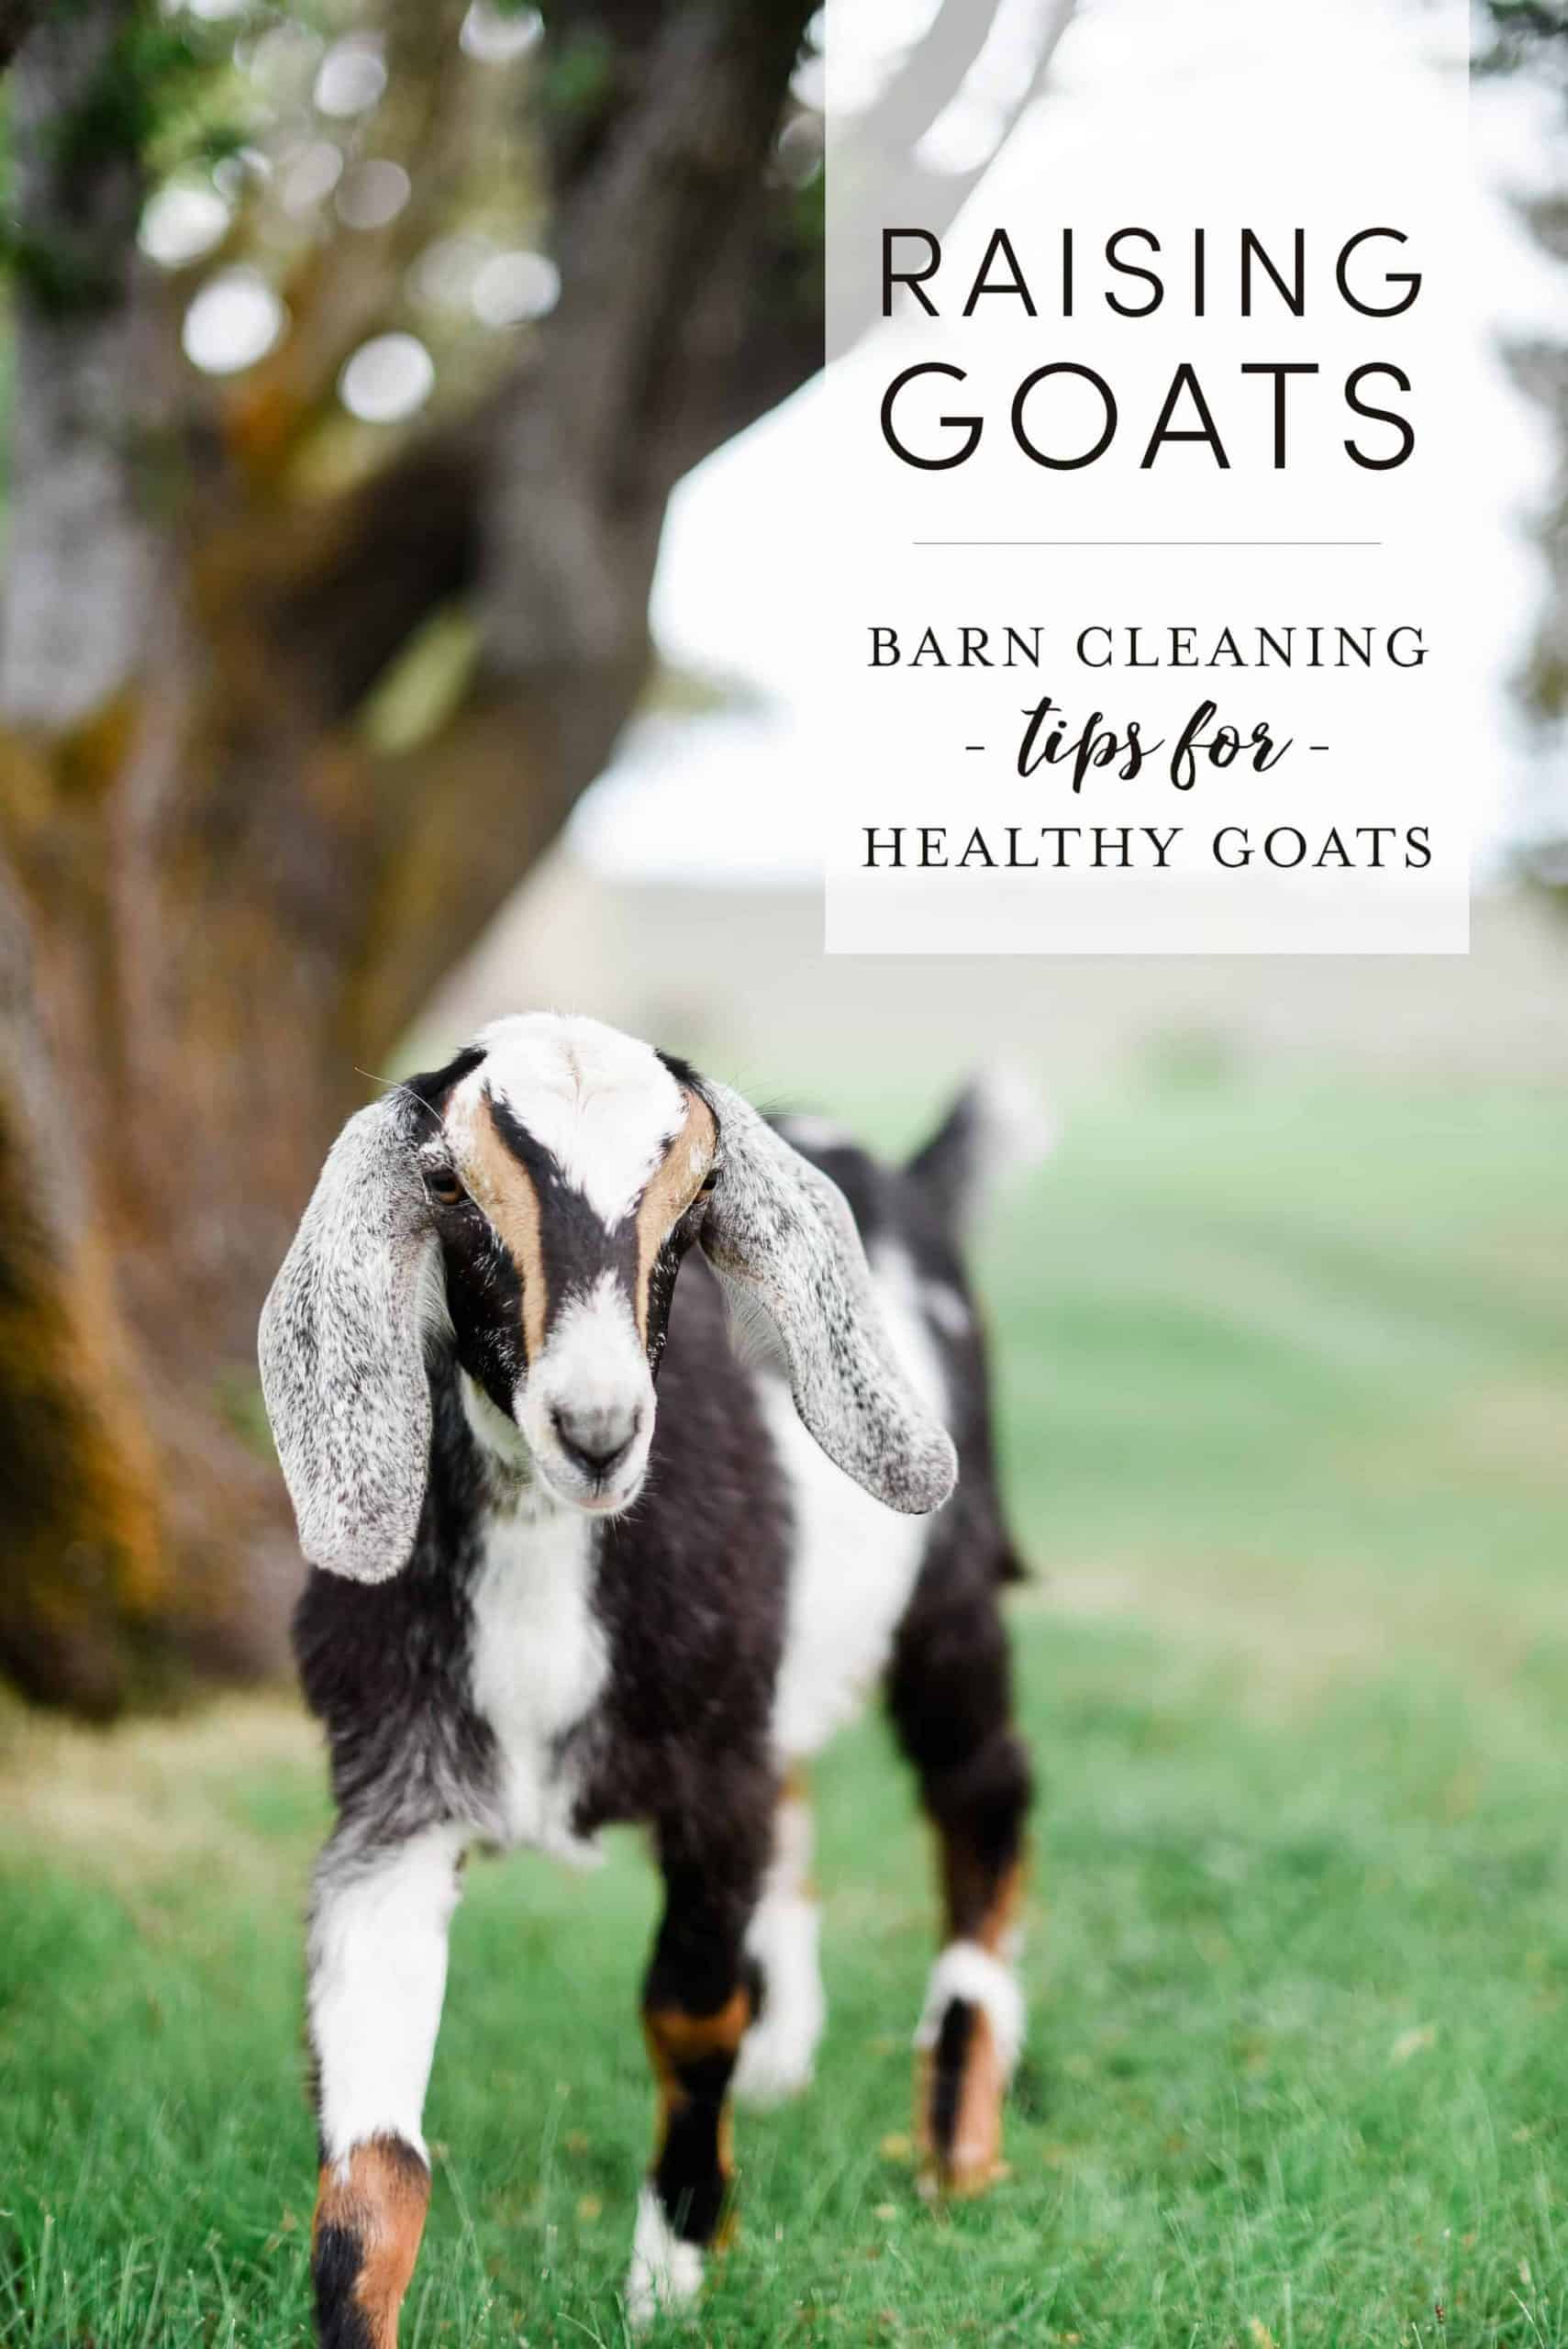 One of the many questions I receive about raising goats and keeping goats as pets is: How do you keep the goat barn clean? Today I am going to share how I keep our goat barn clean and how we keep our pet goats healthy! 